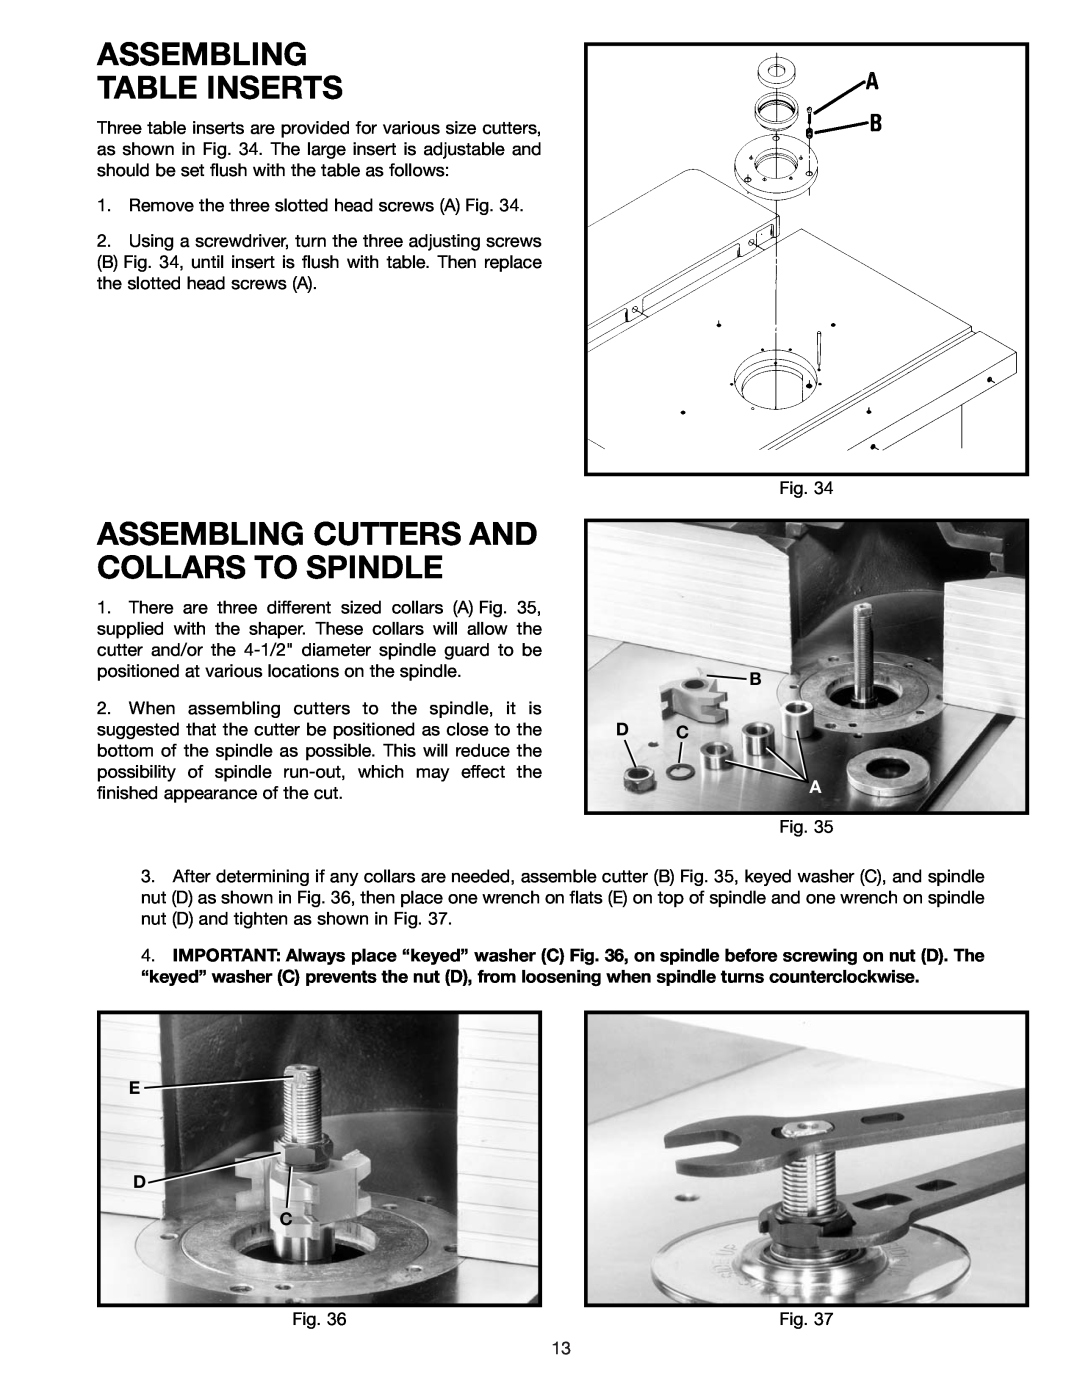 Delta 43-424 instruction manual Assembling Table Inserts, Assembling Cutters And Collars To Spindle, B D C, E D C 